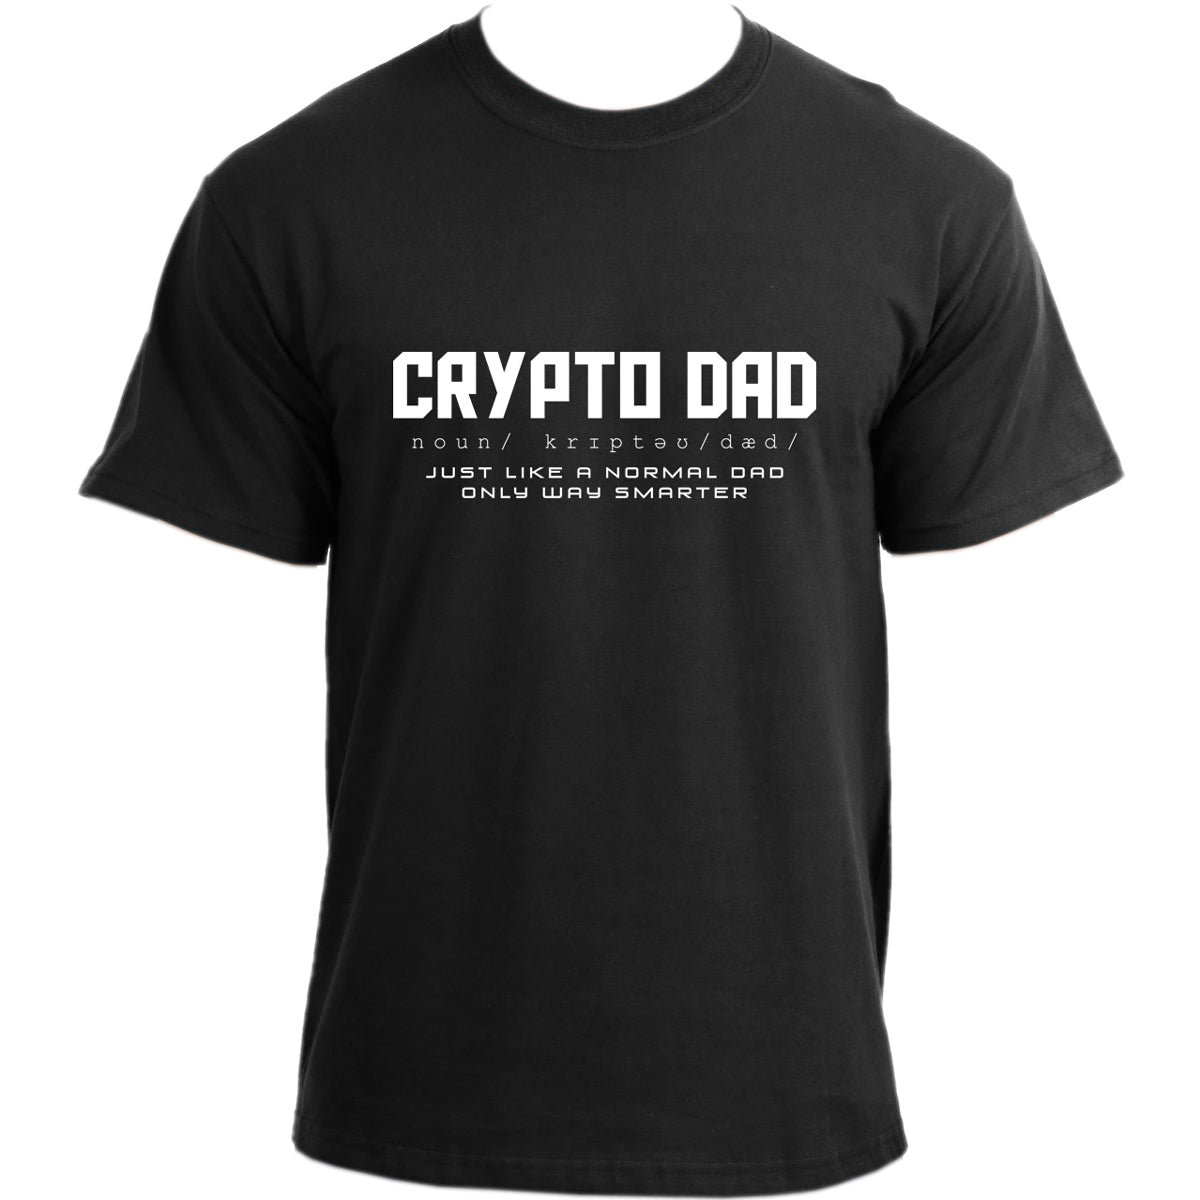 Crypto Dad T-Shirt I Crypto T Shirt I Funny Daddy Shirt I Father's Day Best Dad Ever TShirt